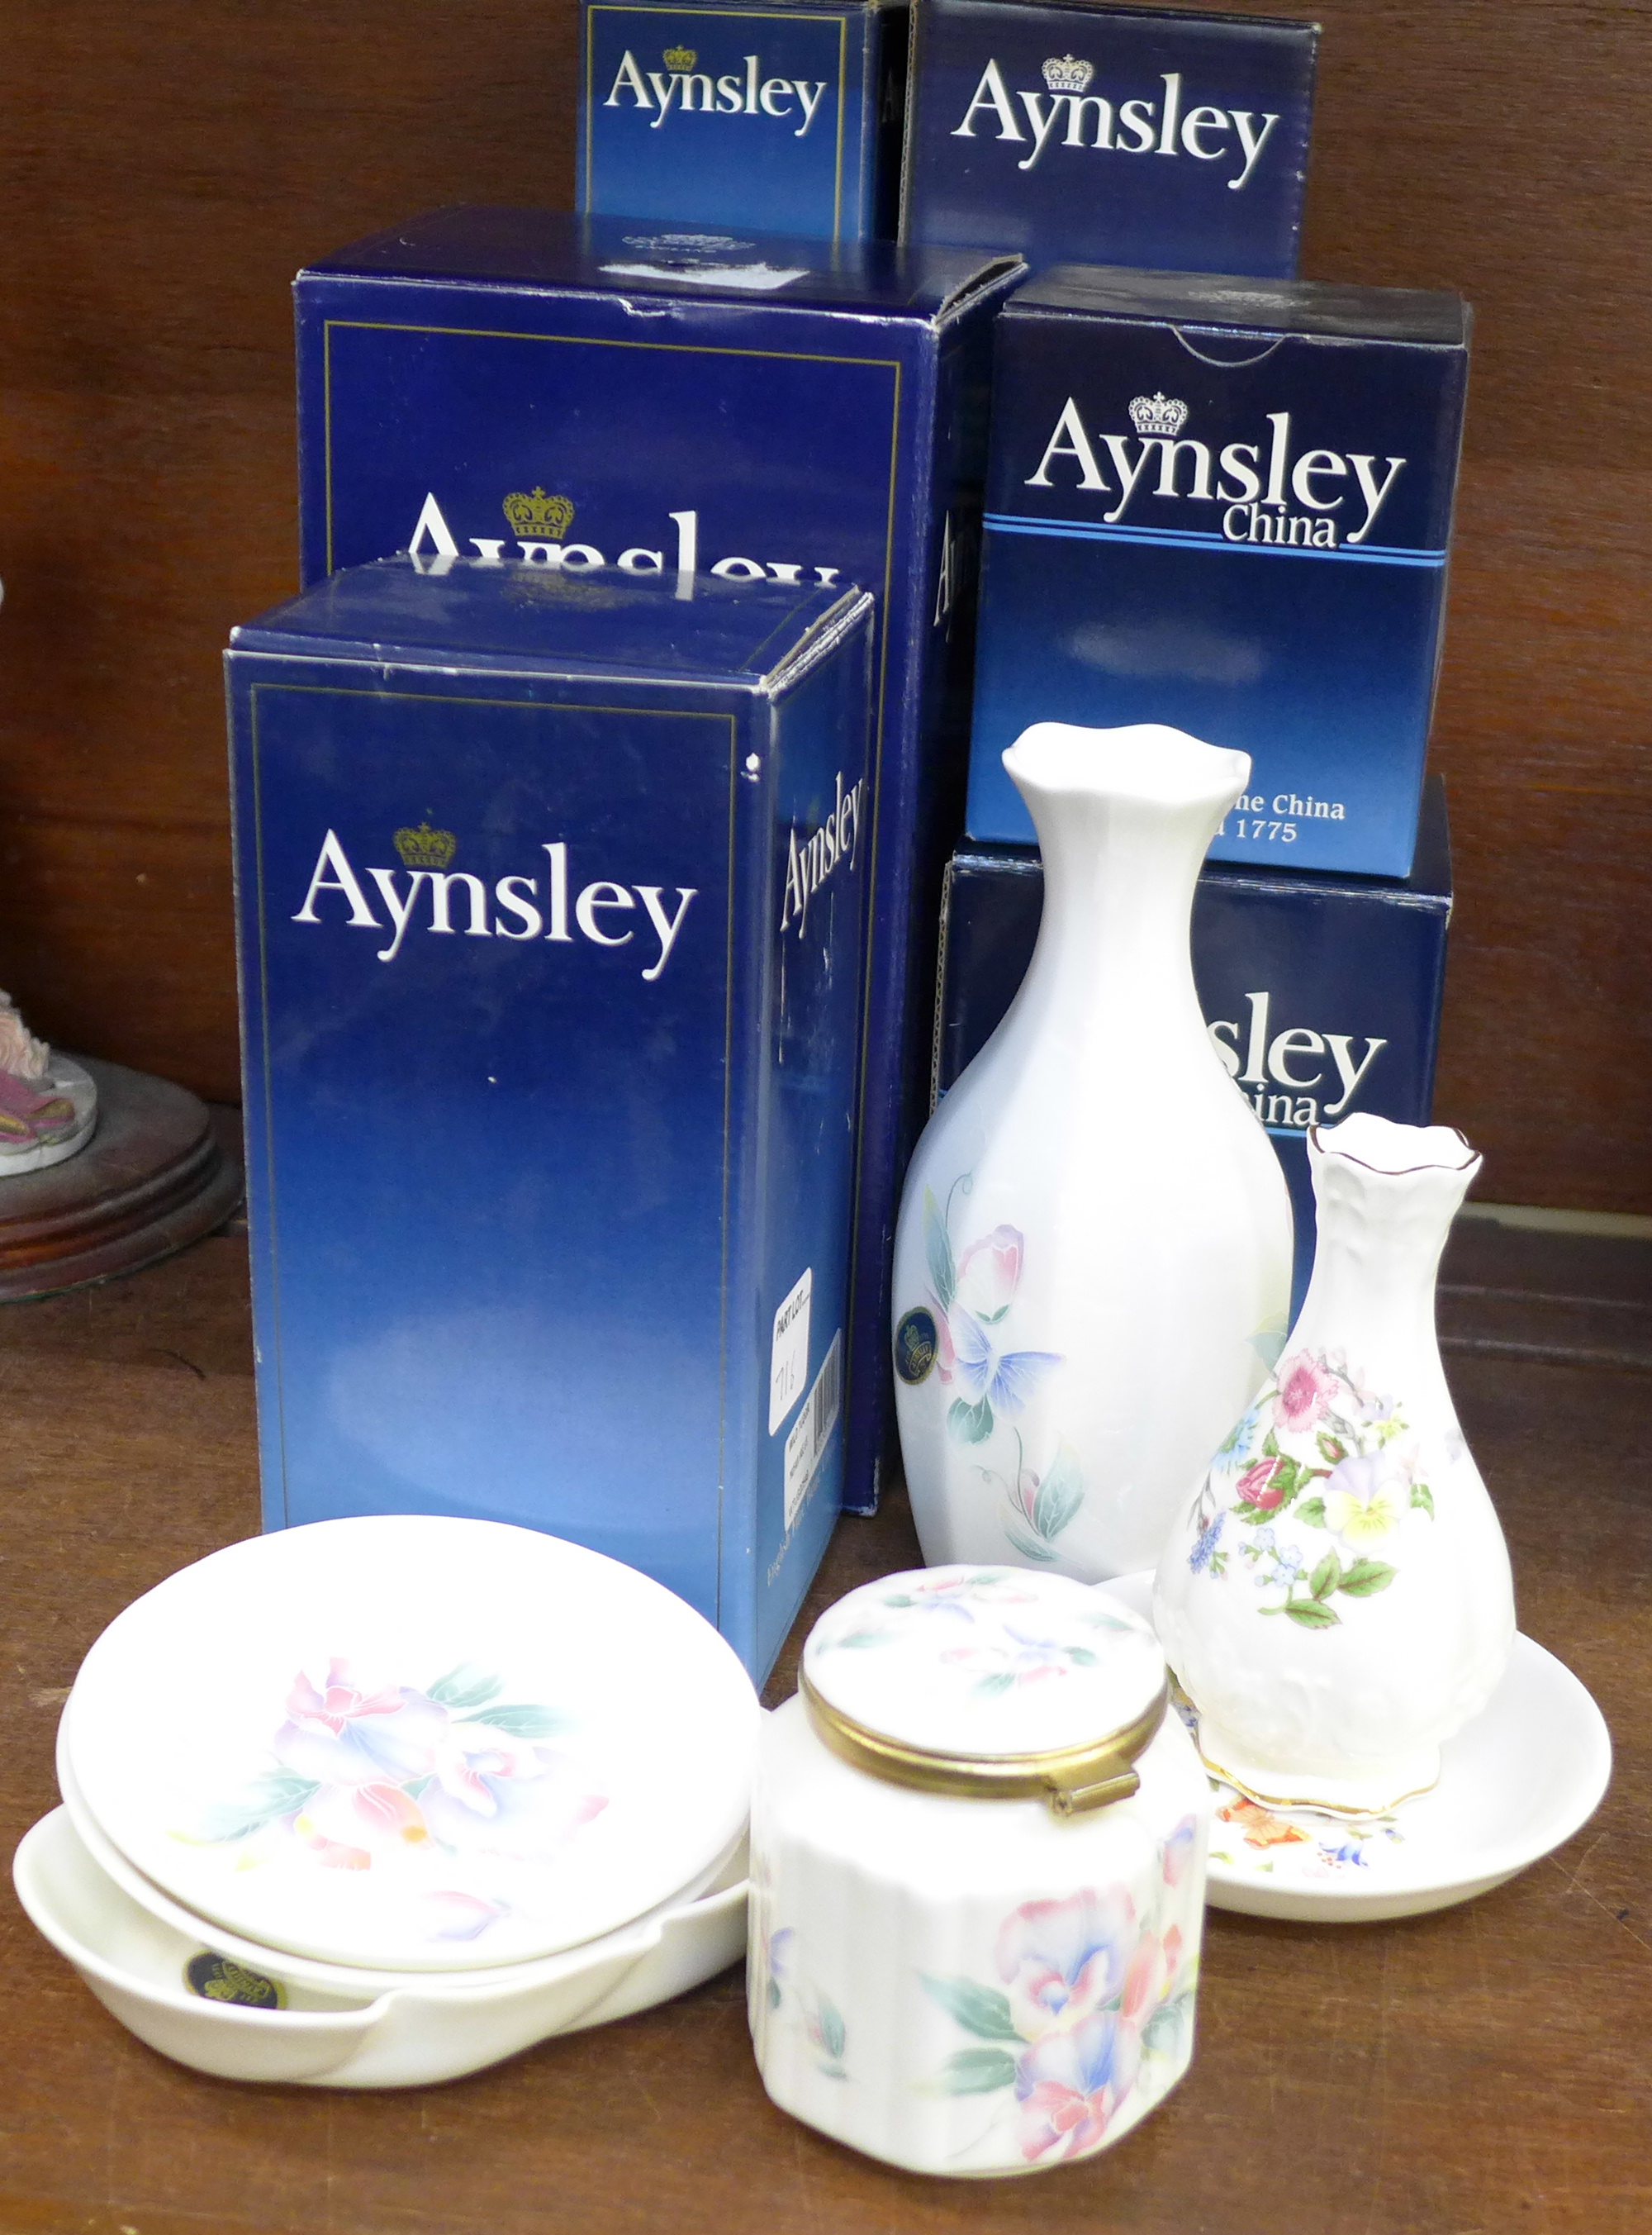 A collection of Aynsley